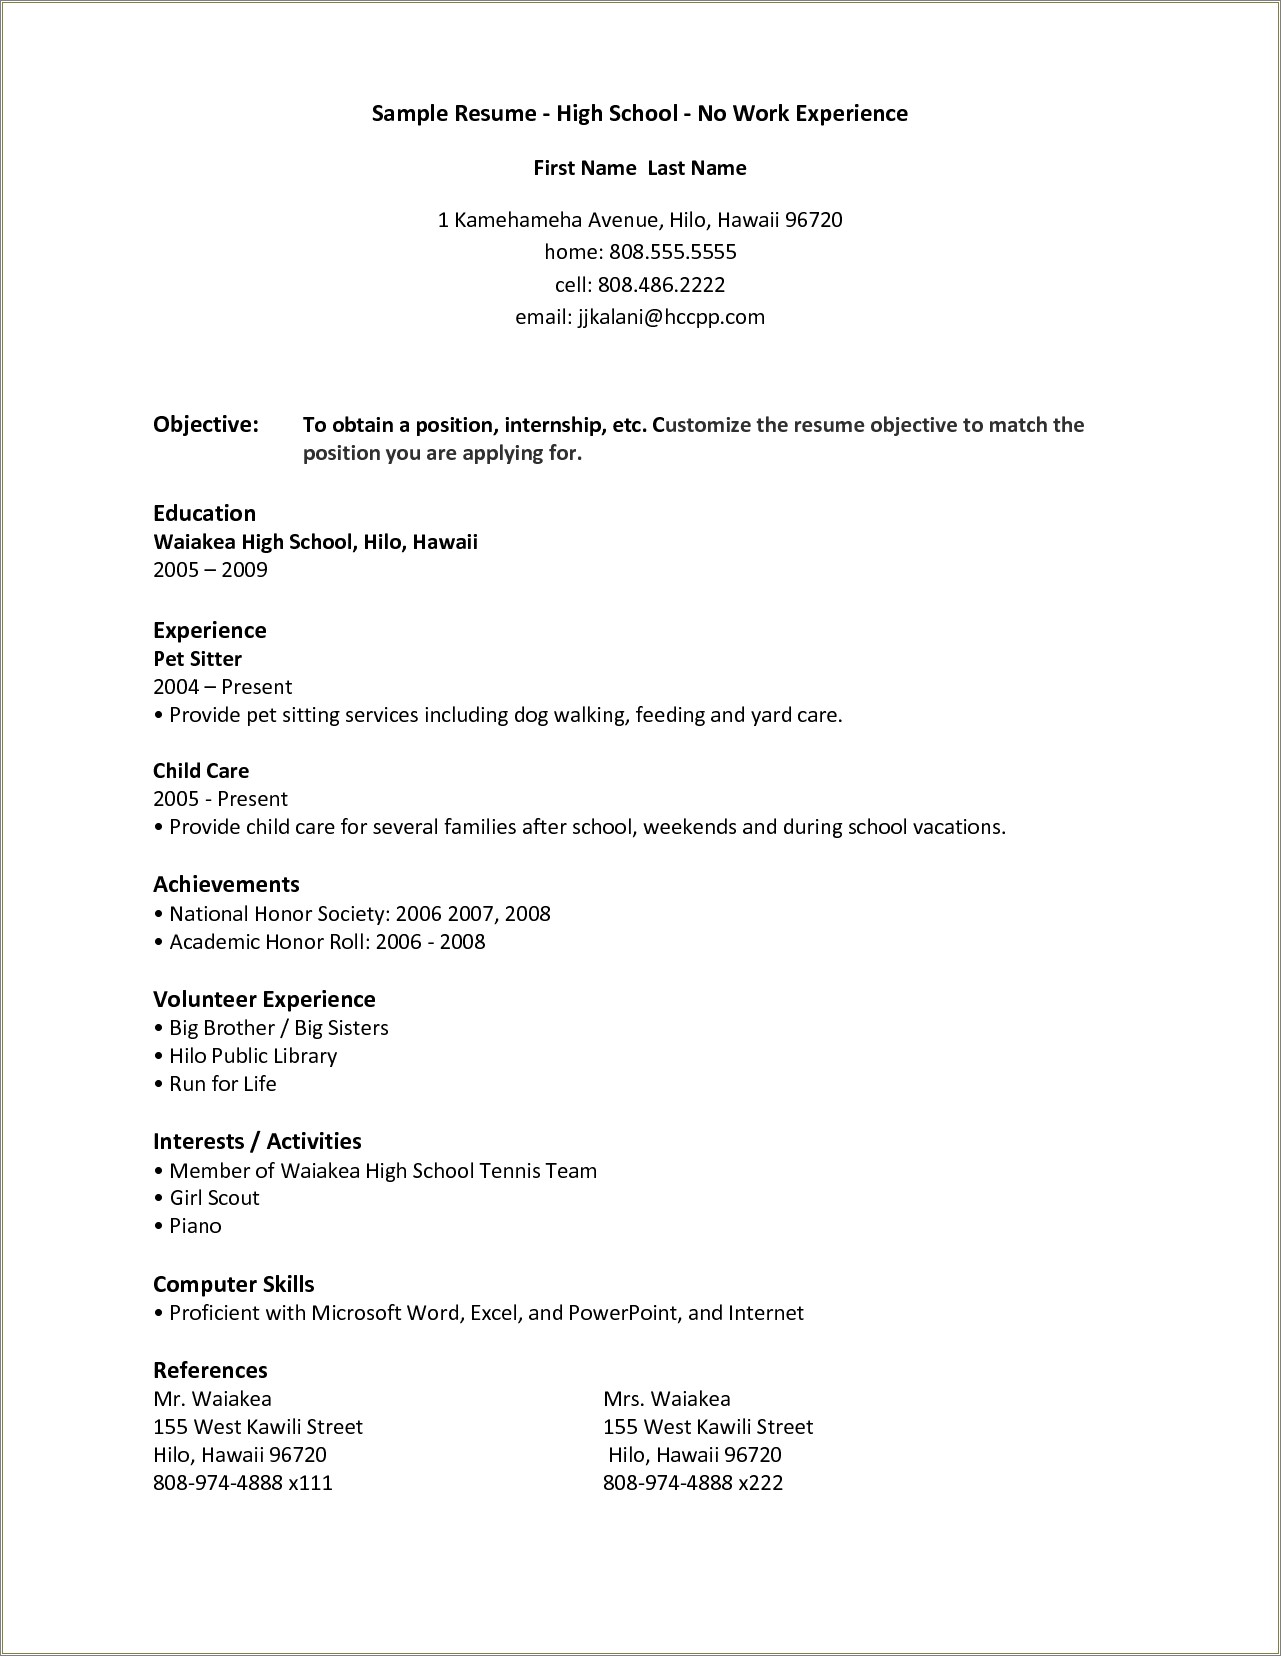 Informal Highschool Resume Without Work Experienc